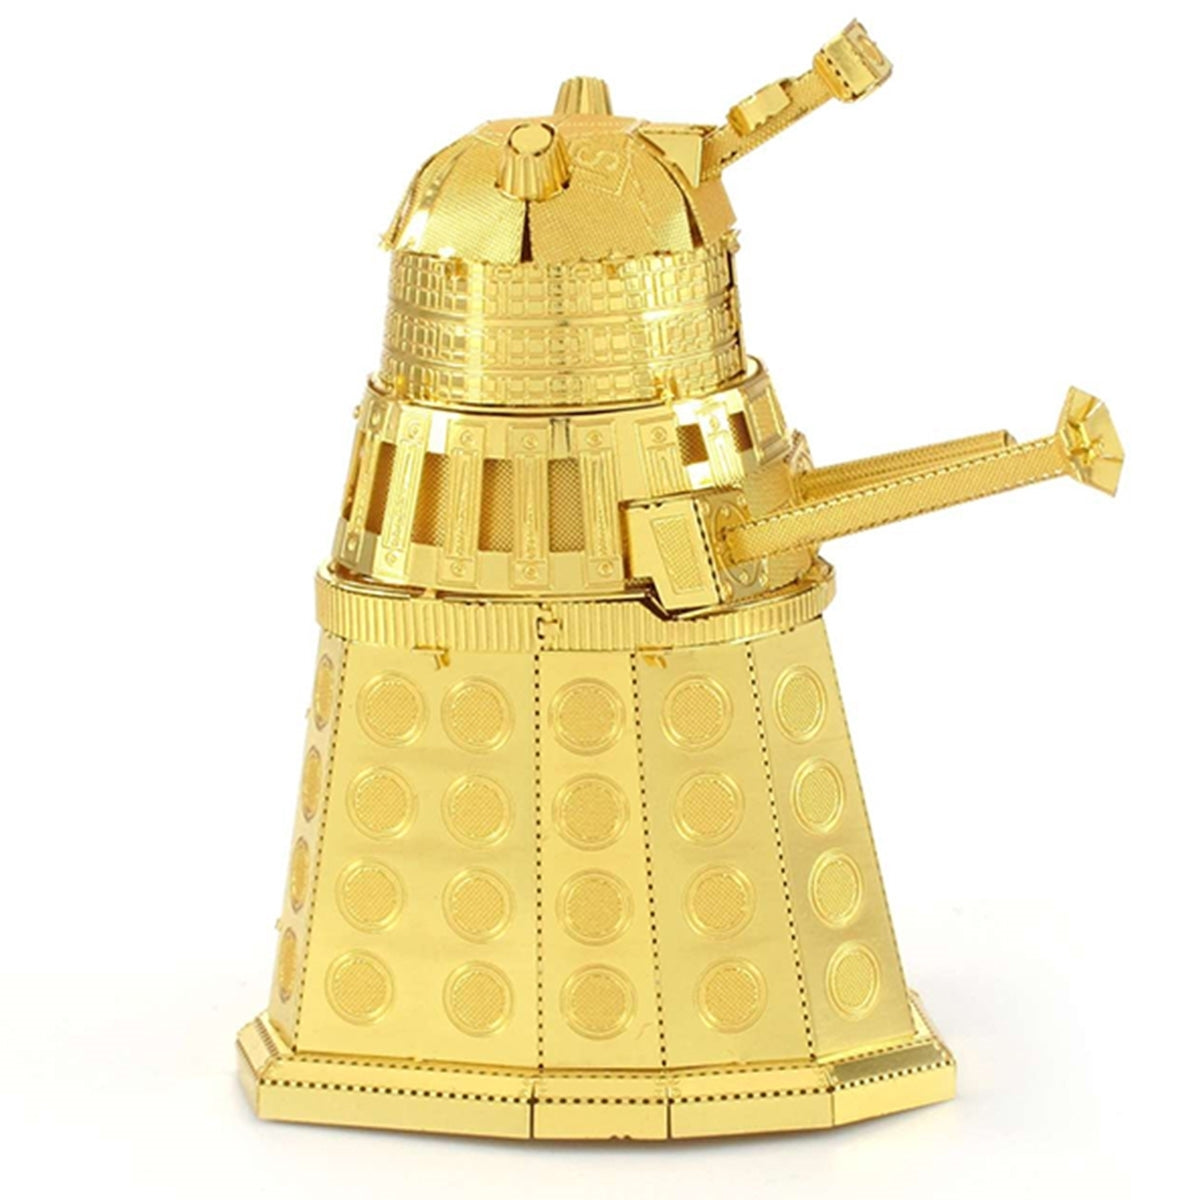 Doctor Who Gold Dalek 3D model kit - Metal Earth gift puzzle puzzle